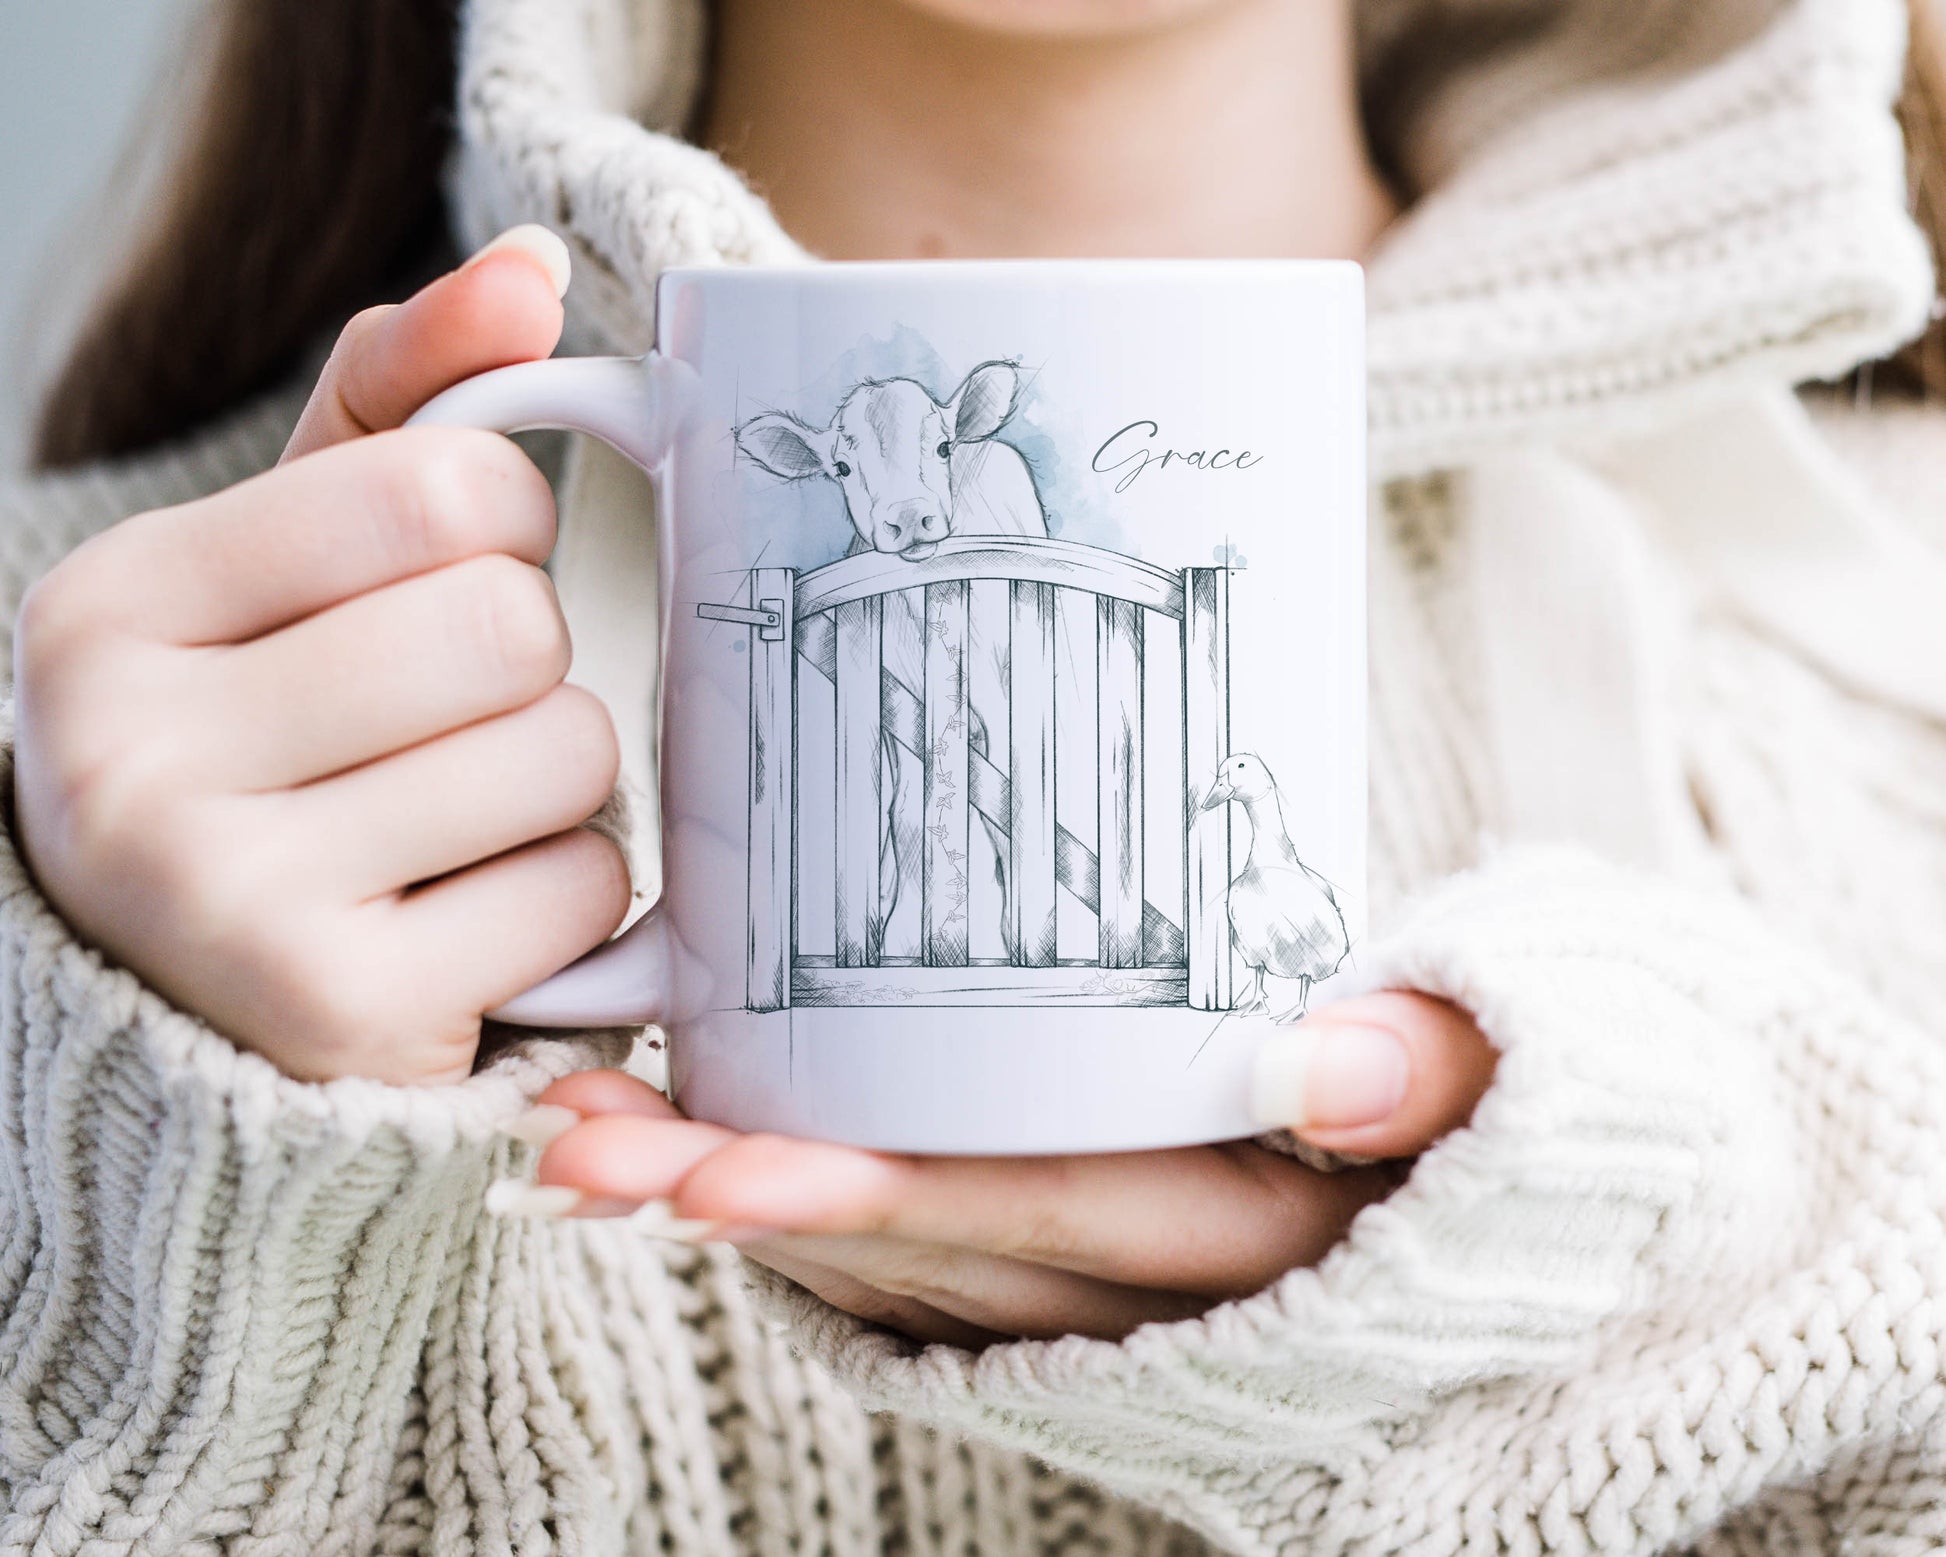 Personalised ceramic mug with a sketched image of a cow and a duck standing at a gate